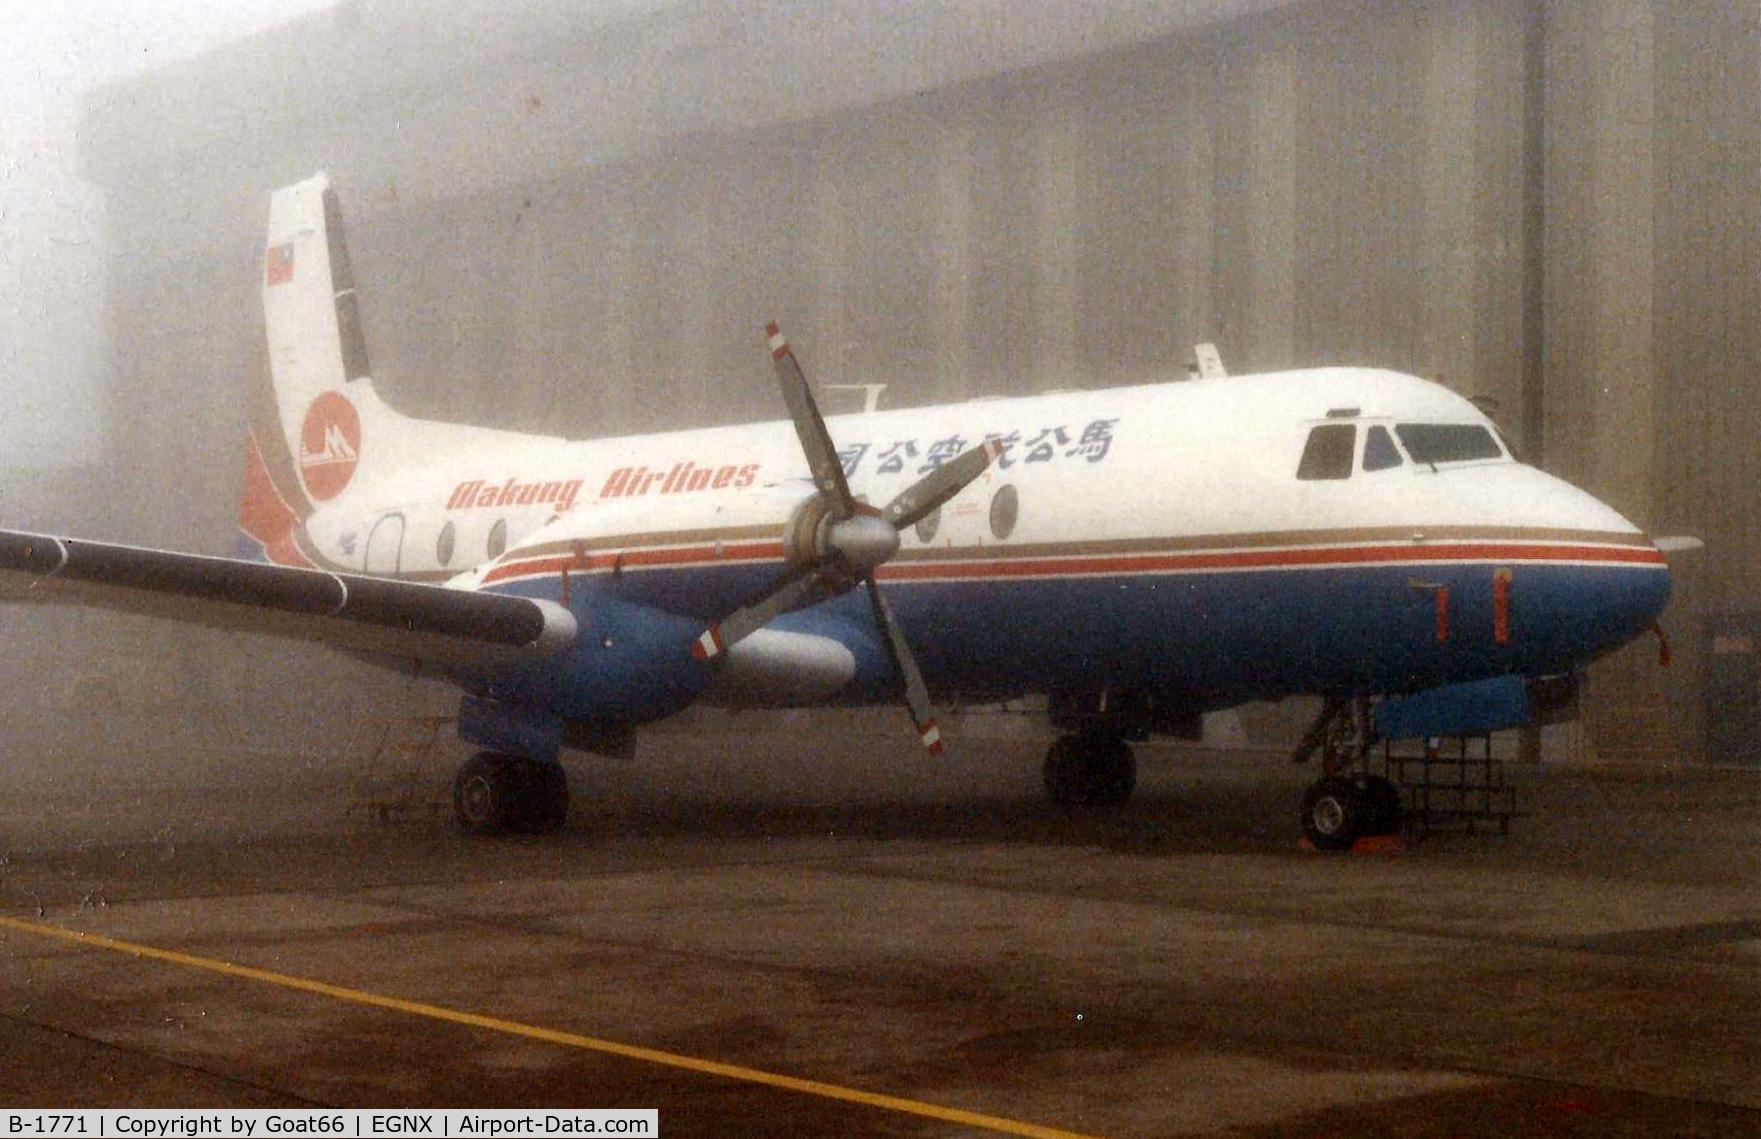 B-1771, 1987 British Aerospace HS.748 Series 2B C/N 1806, Foggy January day, 1989,  Makung Airlines B-1771 sits outside Field's hangar awaiting attention